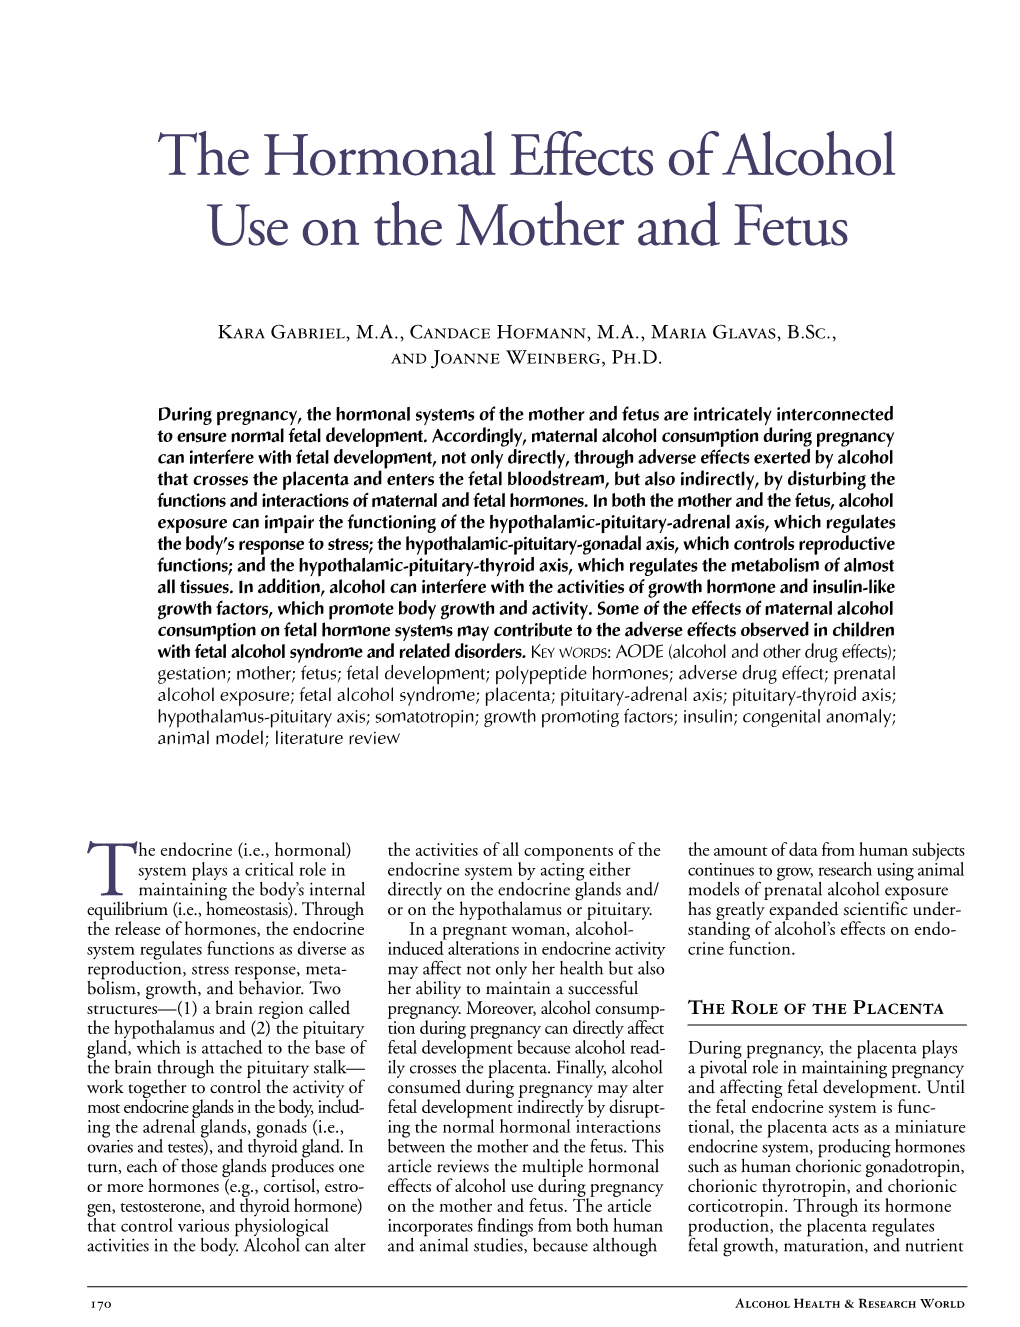 The Hormonal Effects of Alcohol Use on the Mother and Fetus